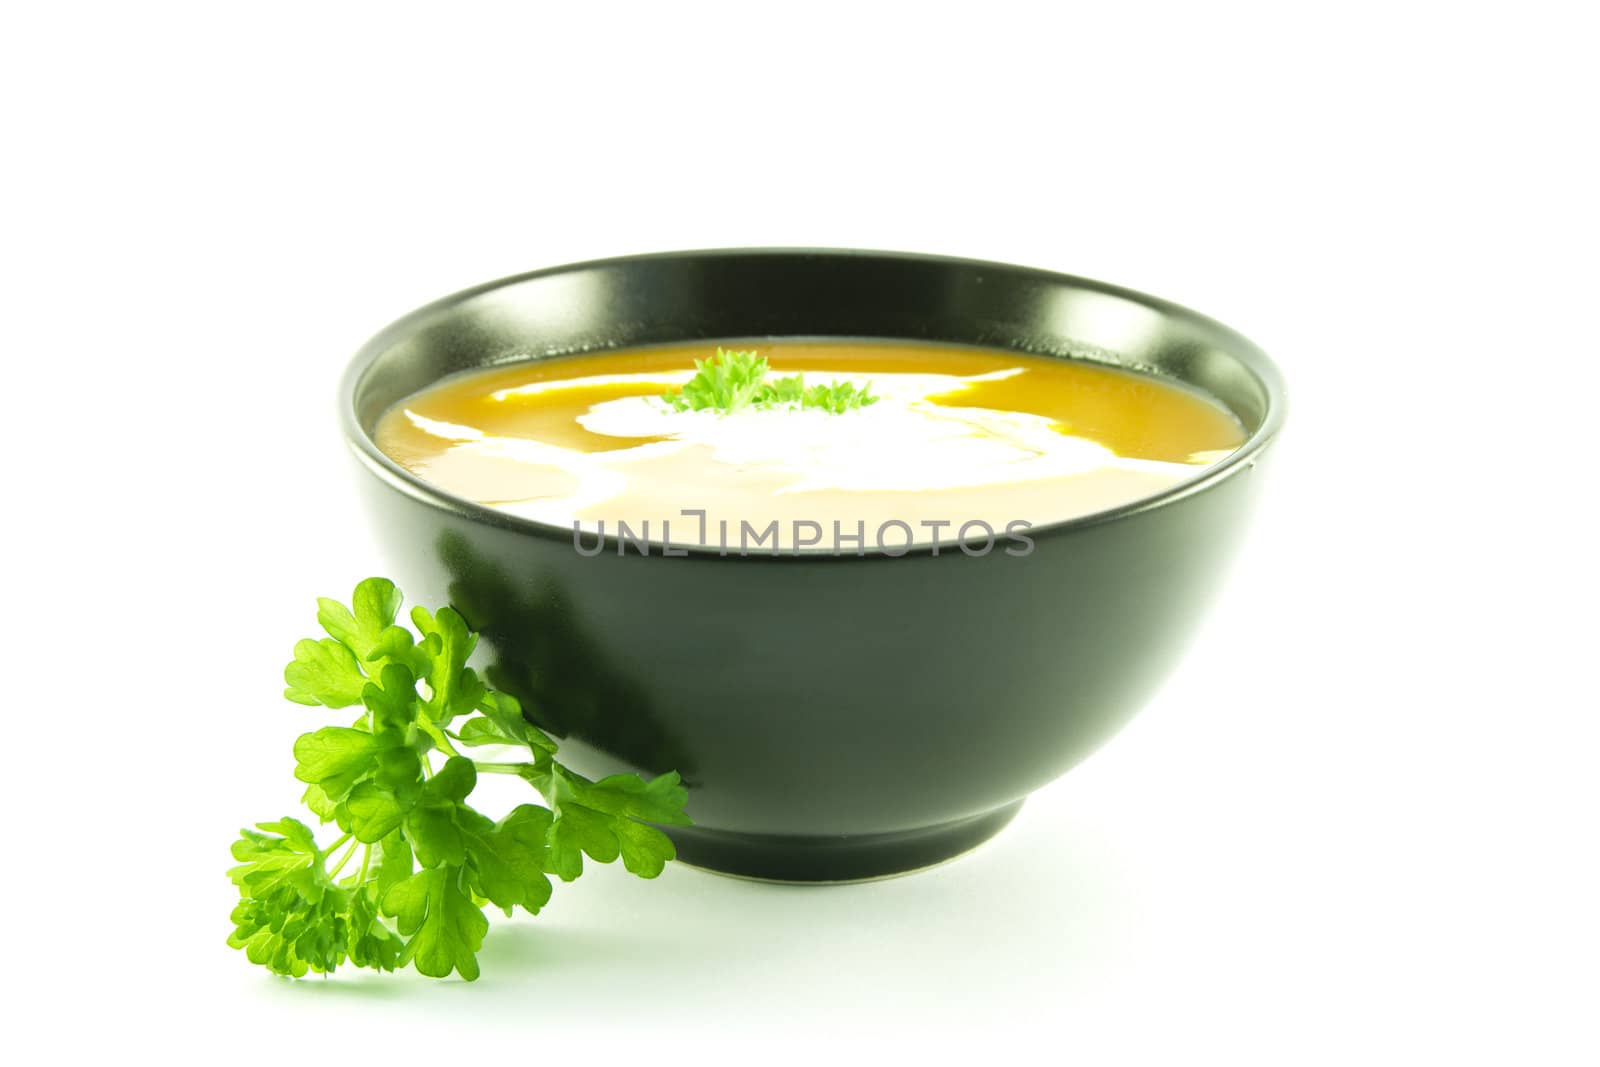 Rich red deliicious tomato soup in a small round black bowl with cream and a sprig of parsley on a white background